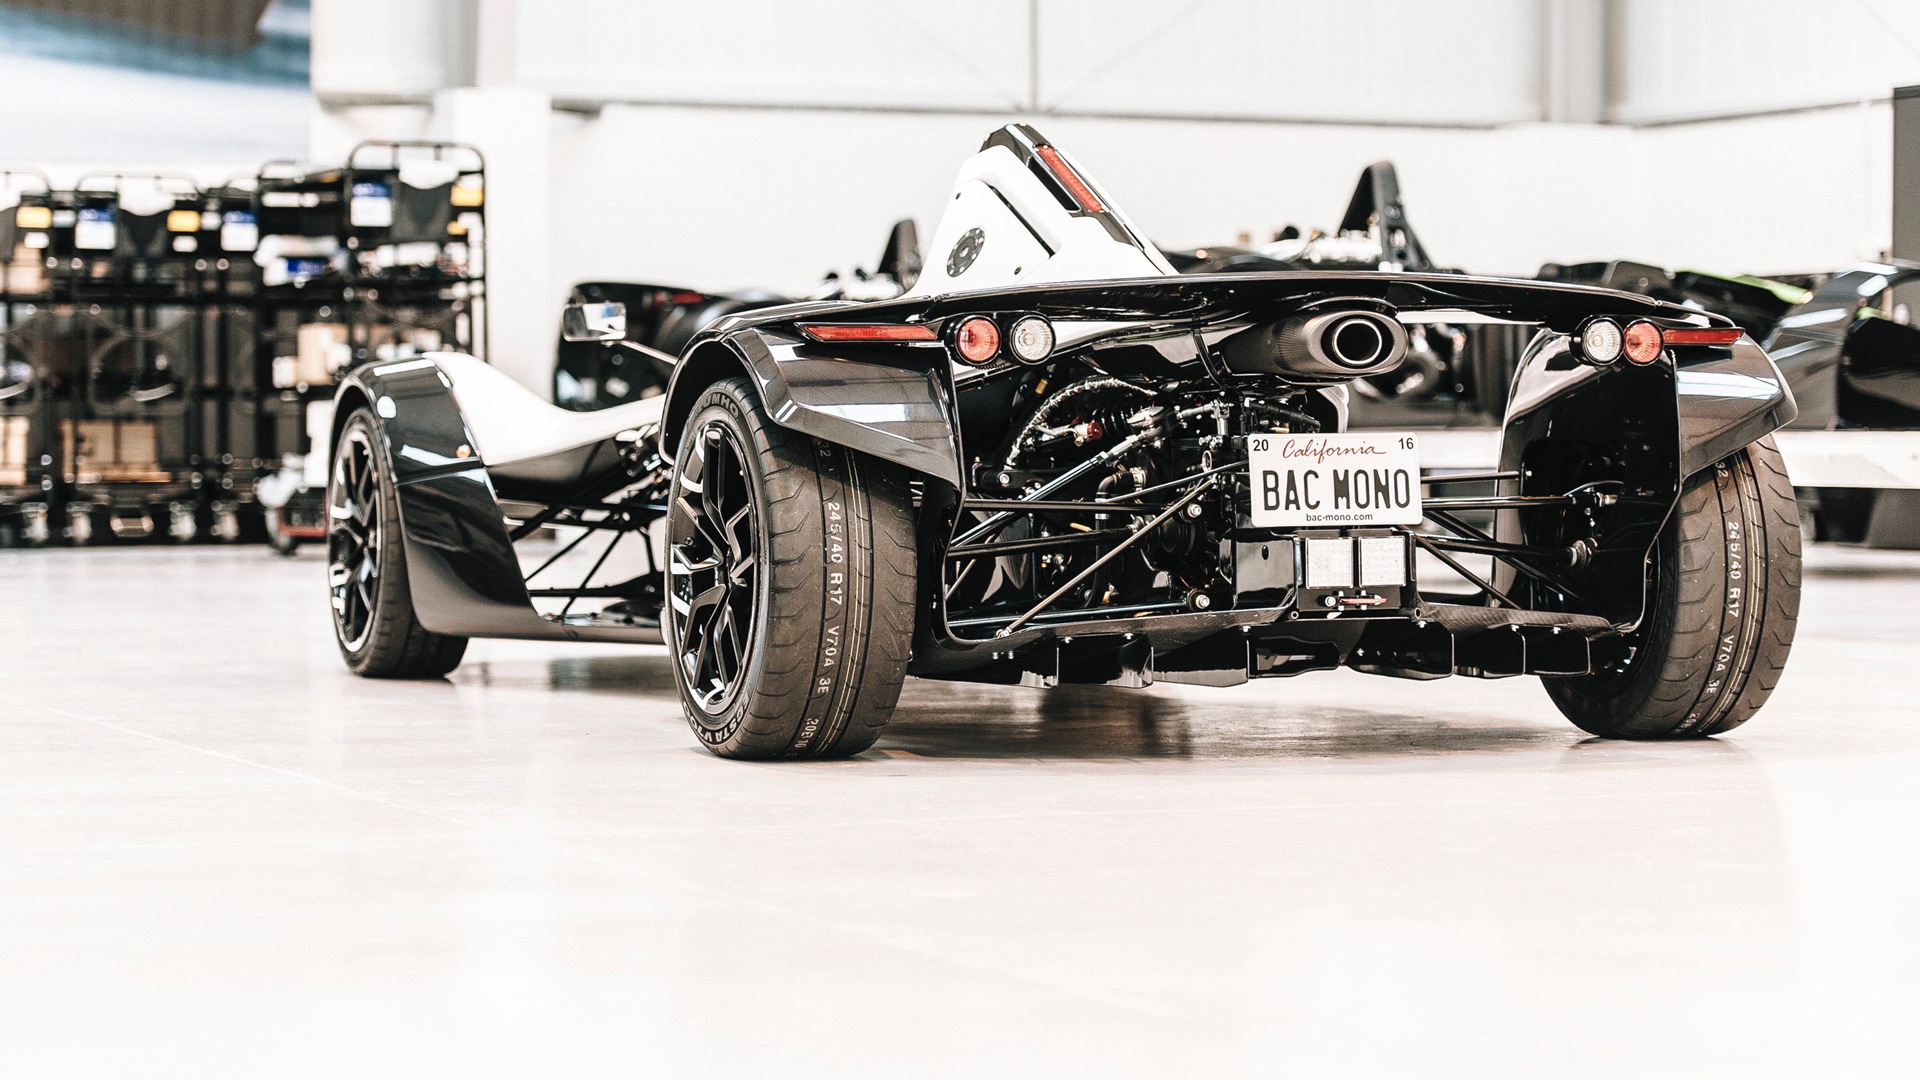 2016 BAC Mono fitted with rear wheel arches made from graphene